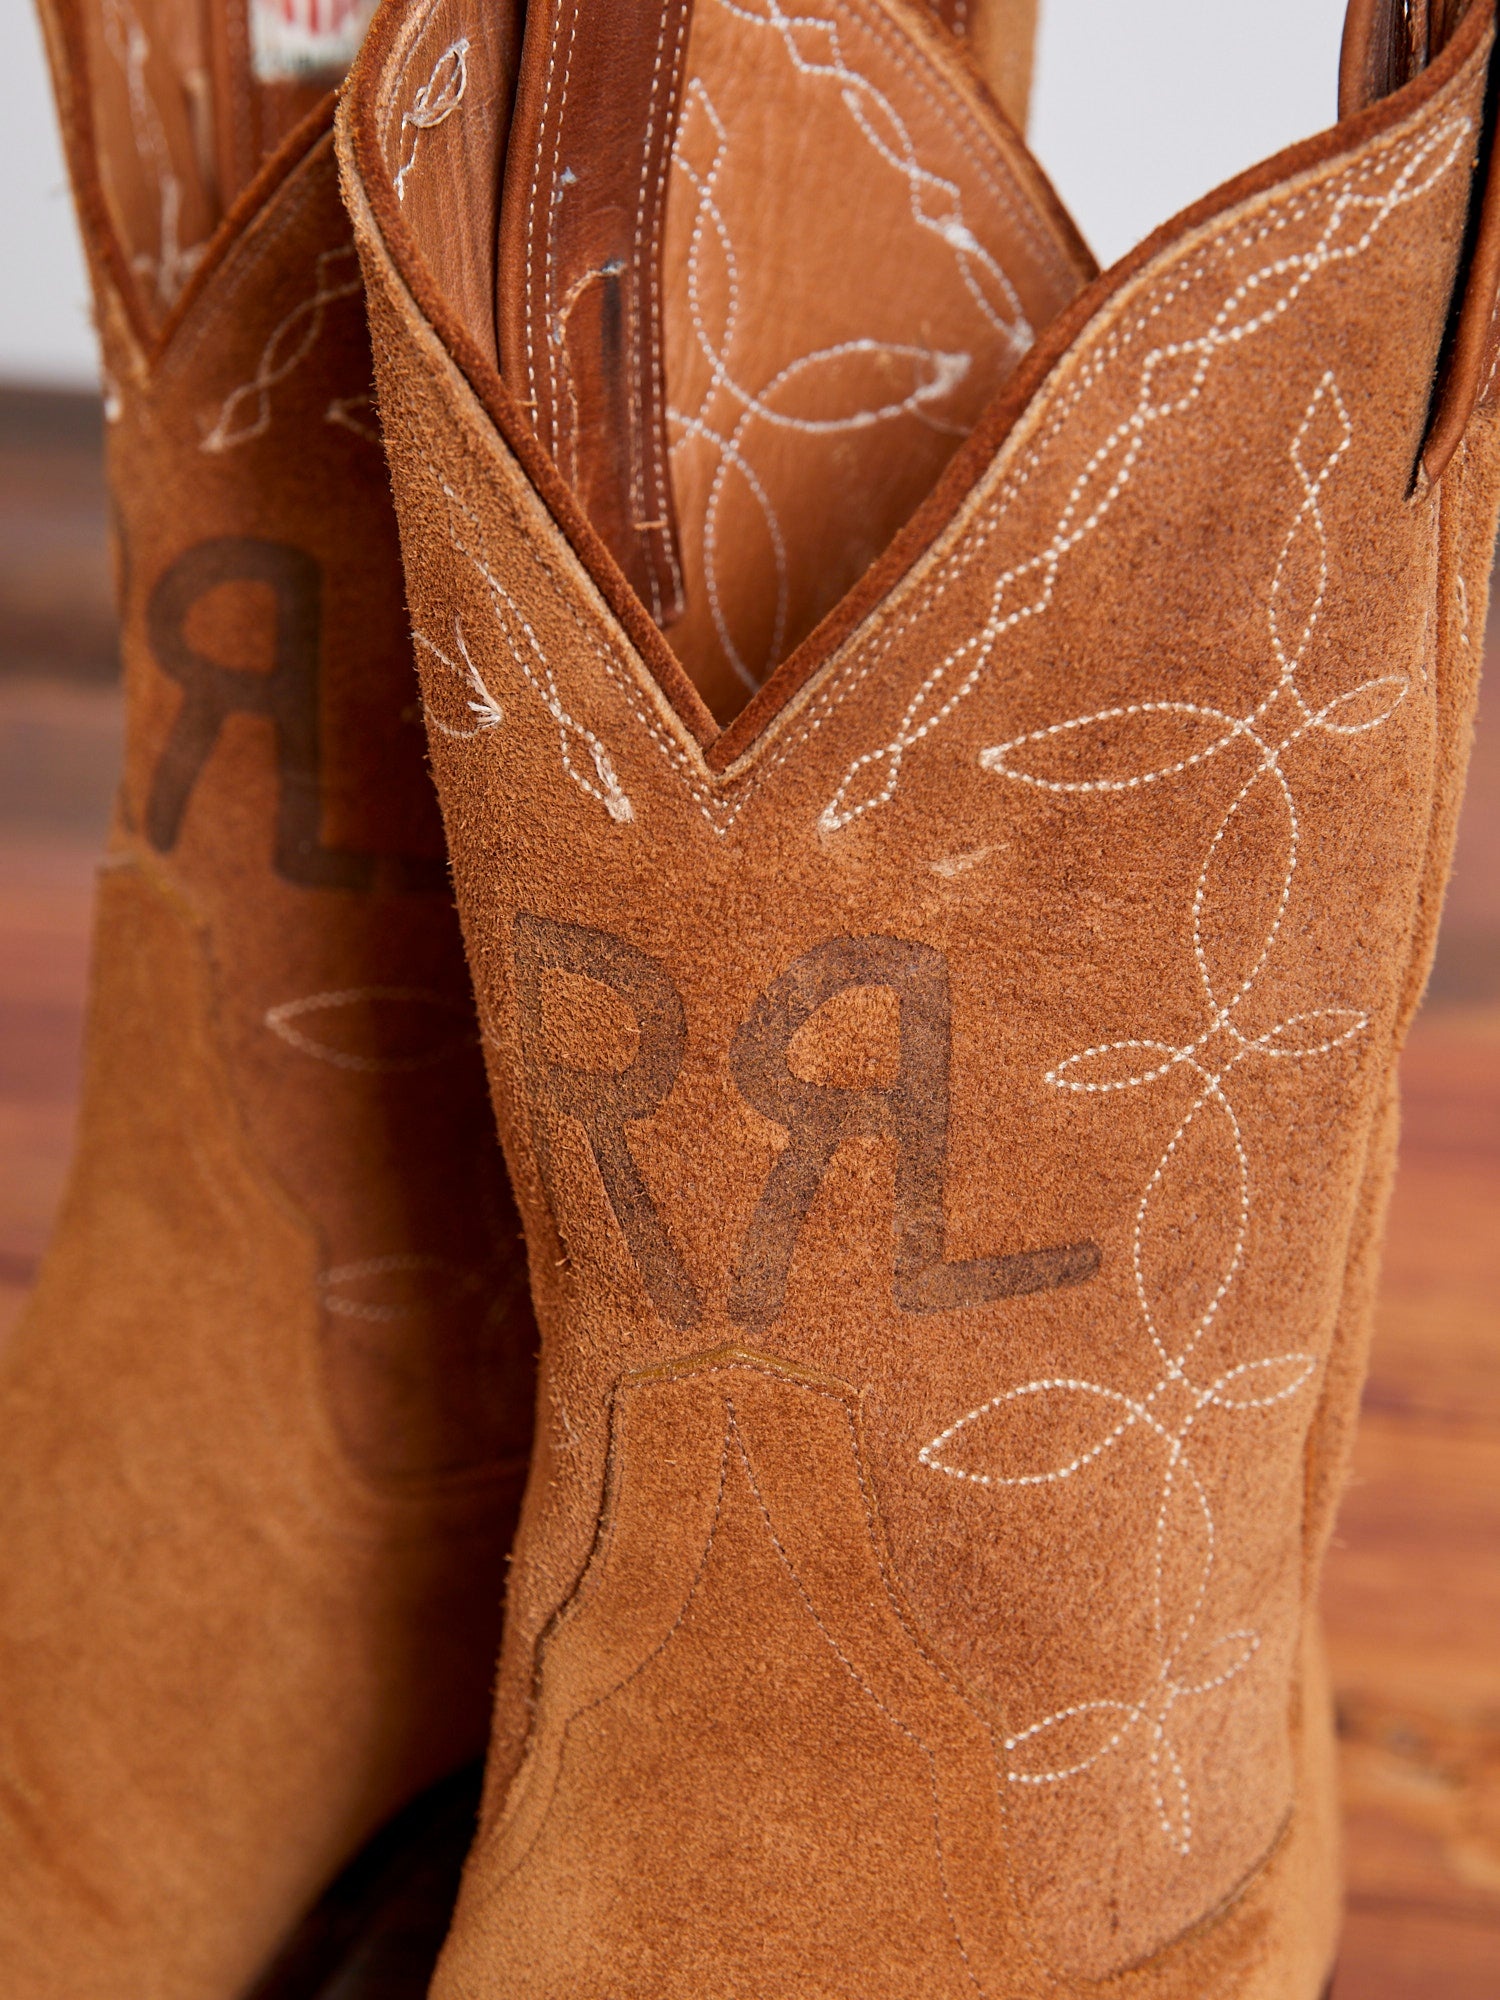 Plainview Suede Cowboy Boot in Light Java - 9